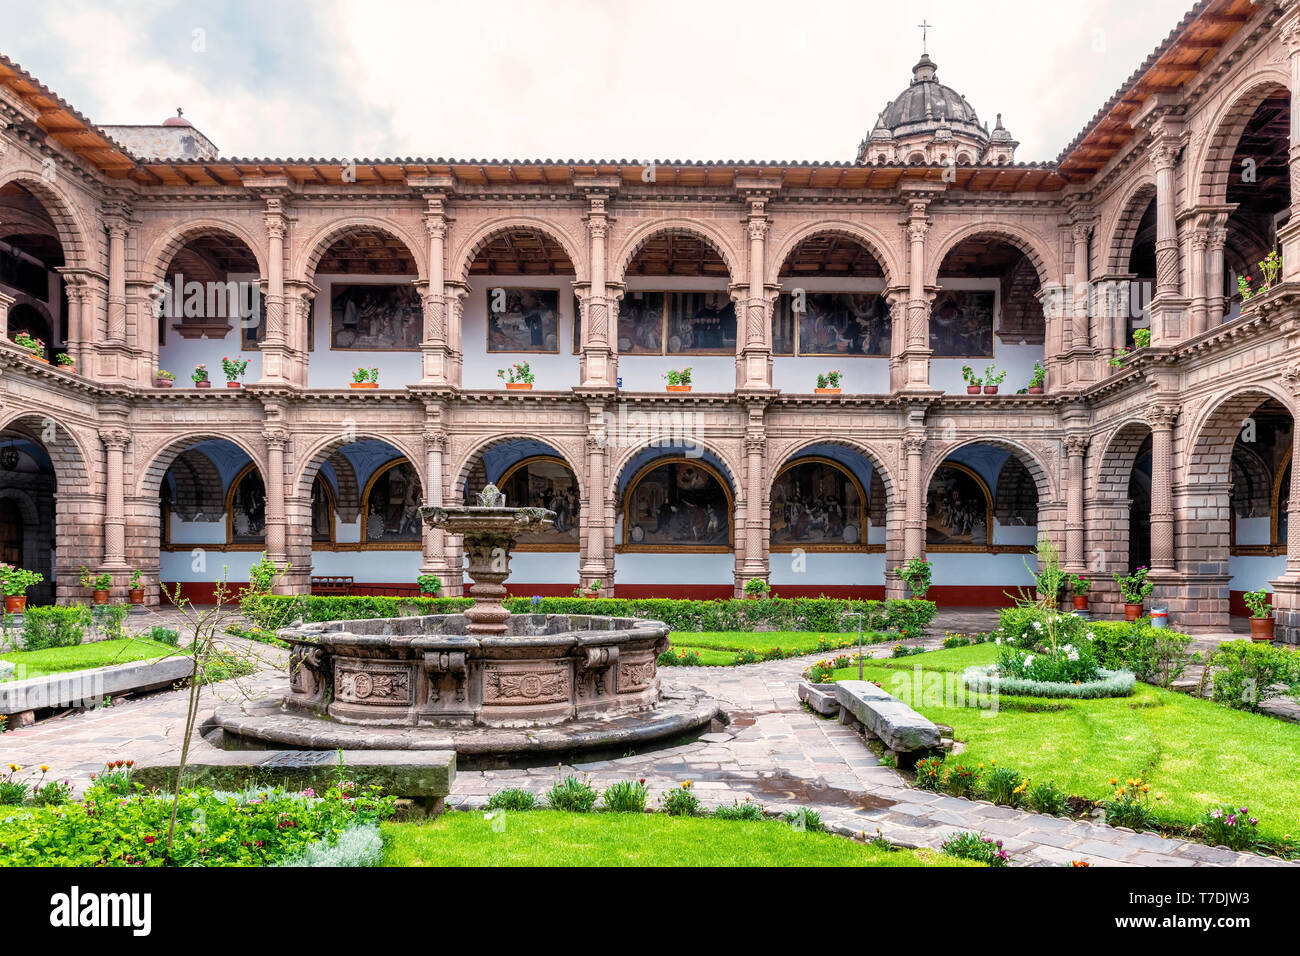 Cusco, Peru - April 3, 2019: Courtyard of Convent of Order of Our Lady of Mercy located in Plaza Espinar, in the historic center of the Cusco city, Pe Stock Photo